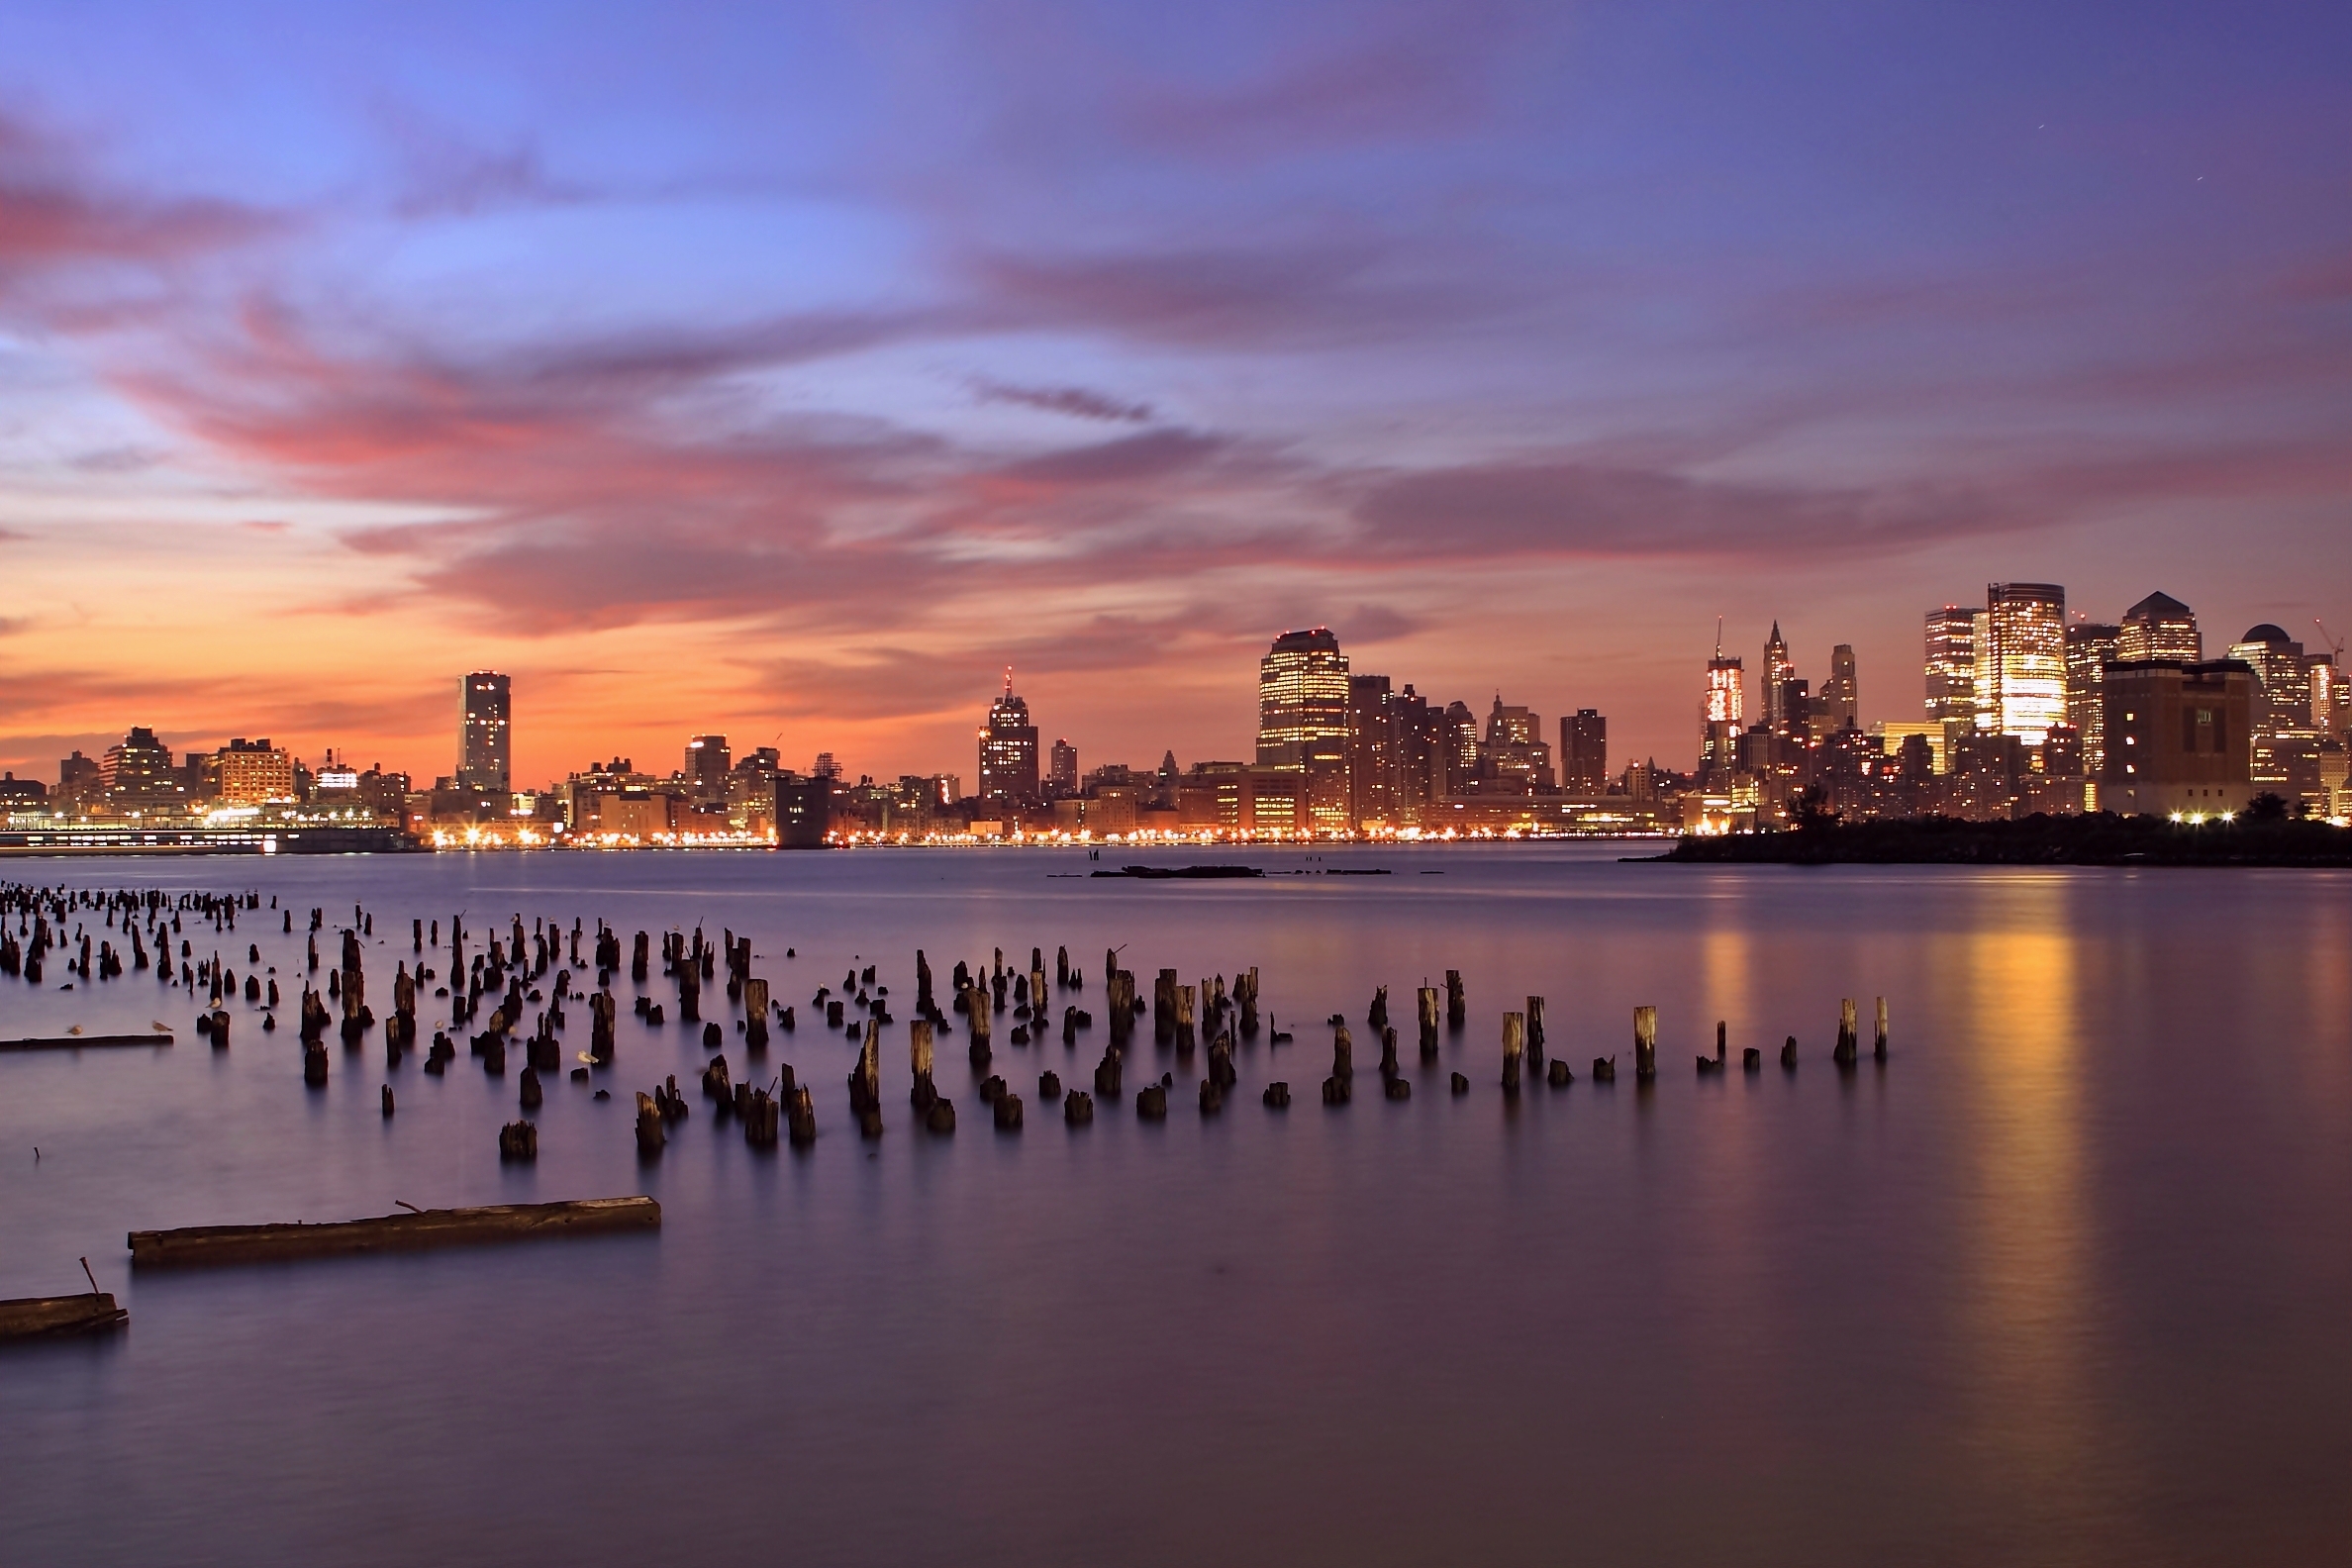 cities, rivers, sunset, sky, lilac, clouds, usa, orange, lights, wooden, skyscrapers, backlight, illumination, evening, united states, pillars, jersey city, state of new jersey, new jersey state, hudson, columns QHD